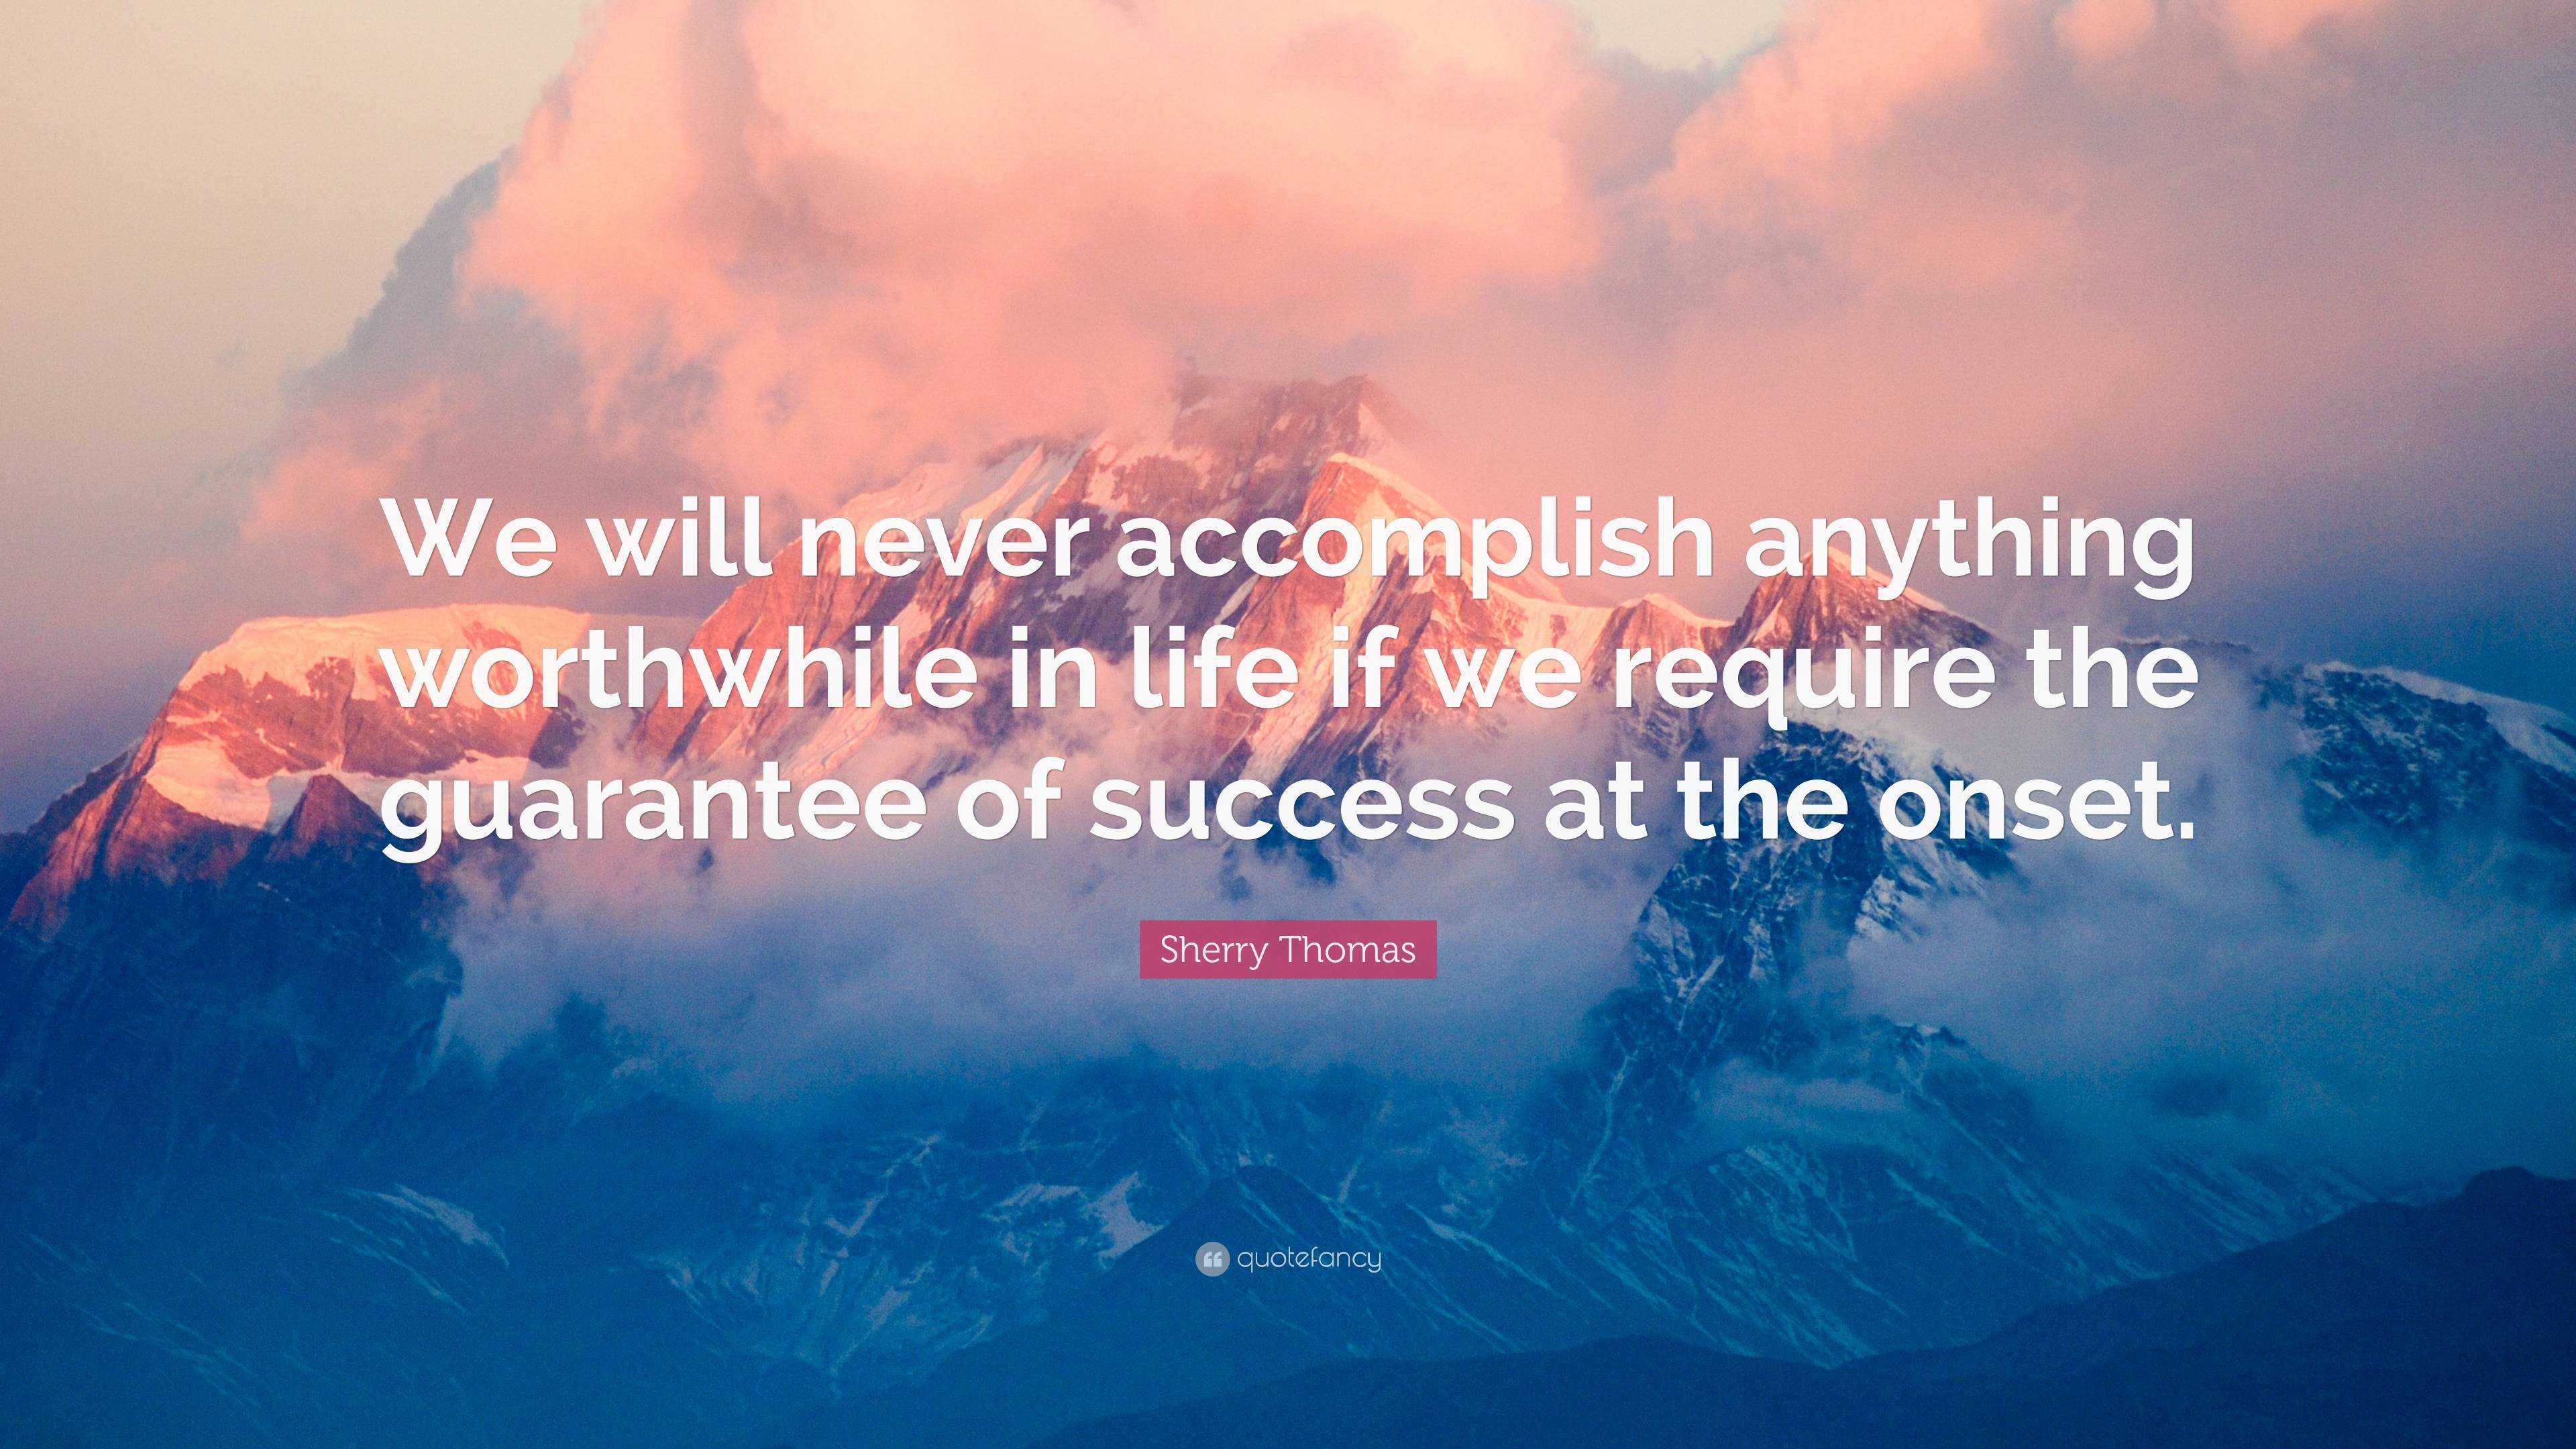 Sherry Thomas Quote: “We will never accomplish anything worthwhile in ...